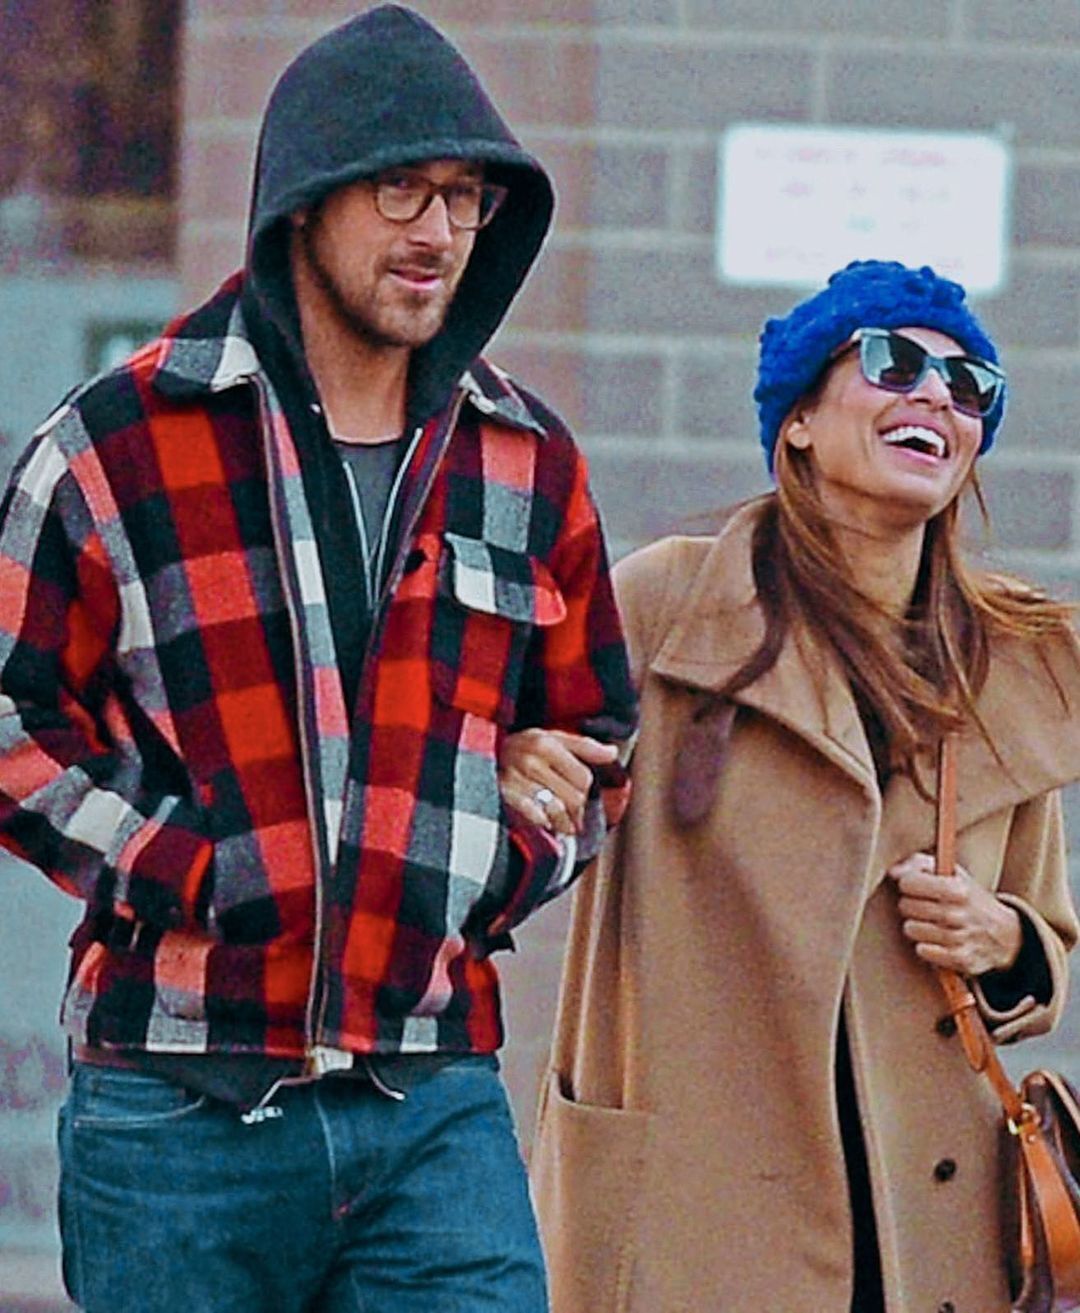 He always says she's beautiful: what is the secret of the strong relationship between Ryan Gosling and Eva Mendes, which the actor himself calls ''a dream''